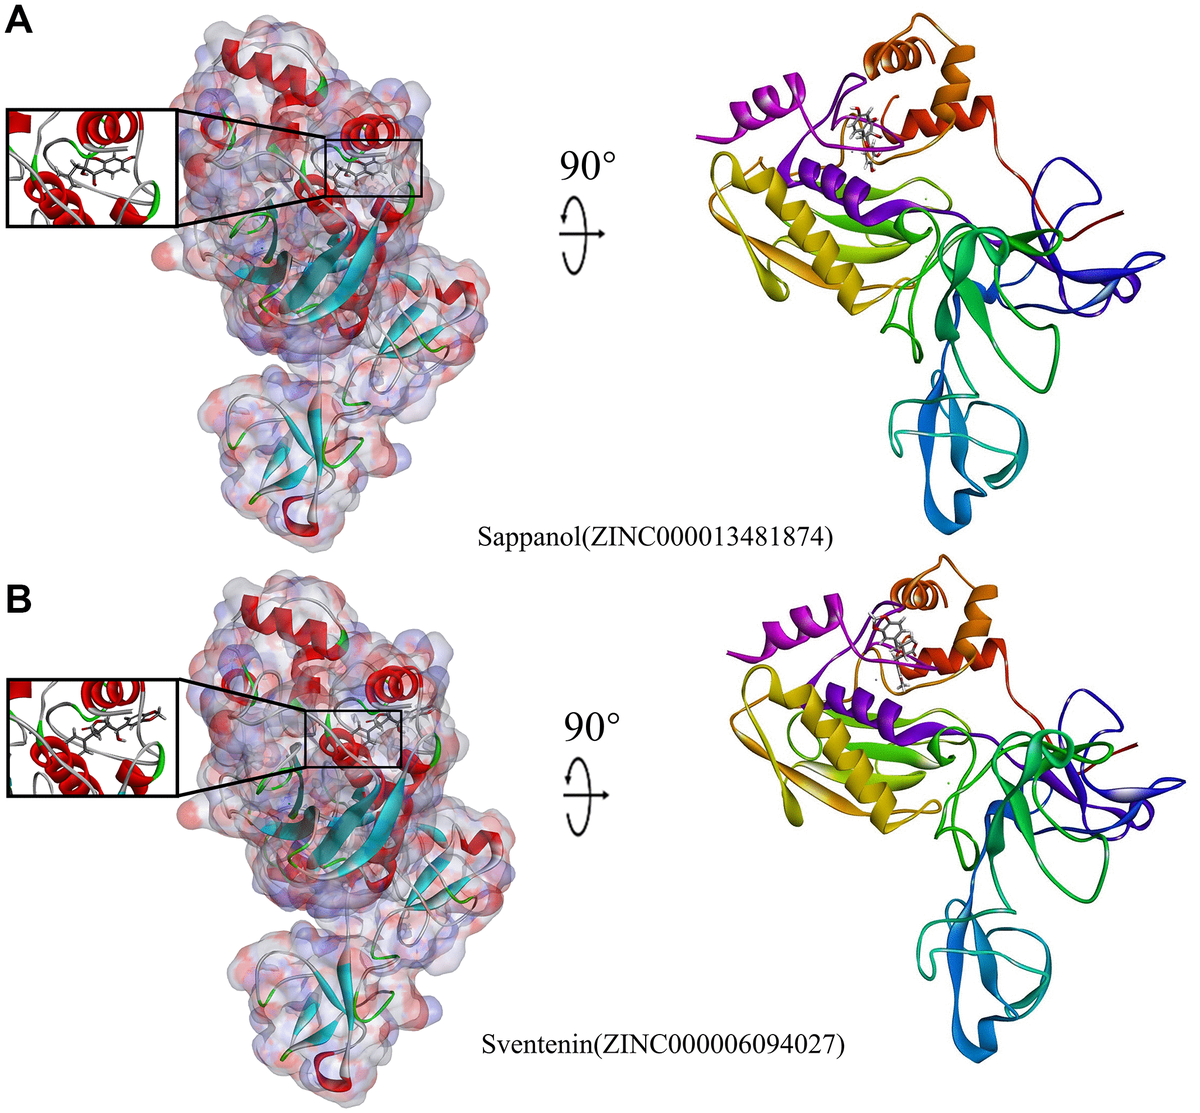 Schematic illustration for MMP9-ligand interactions, showing the surface of the binding areas. Blue and red indicate positive and negative charges, respectively; ligands are shown as sticks, with structures surrounding the ligand-receptor junction displayed as thinner sticks. (A) Sappanol-MMP9 complex. (B) Sventenin-MMP9 complex.